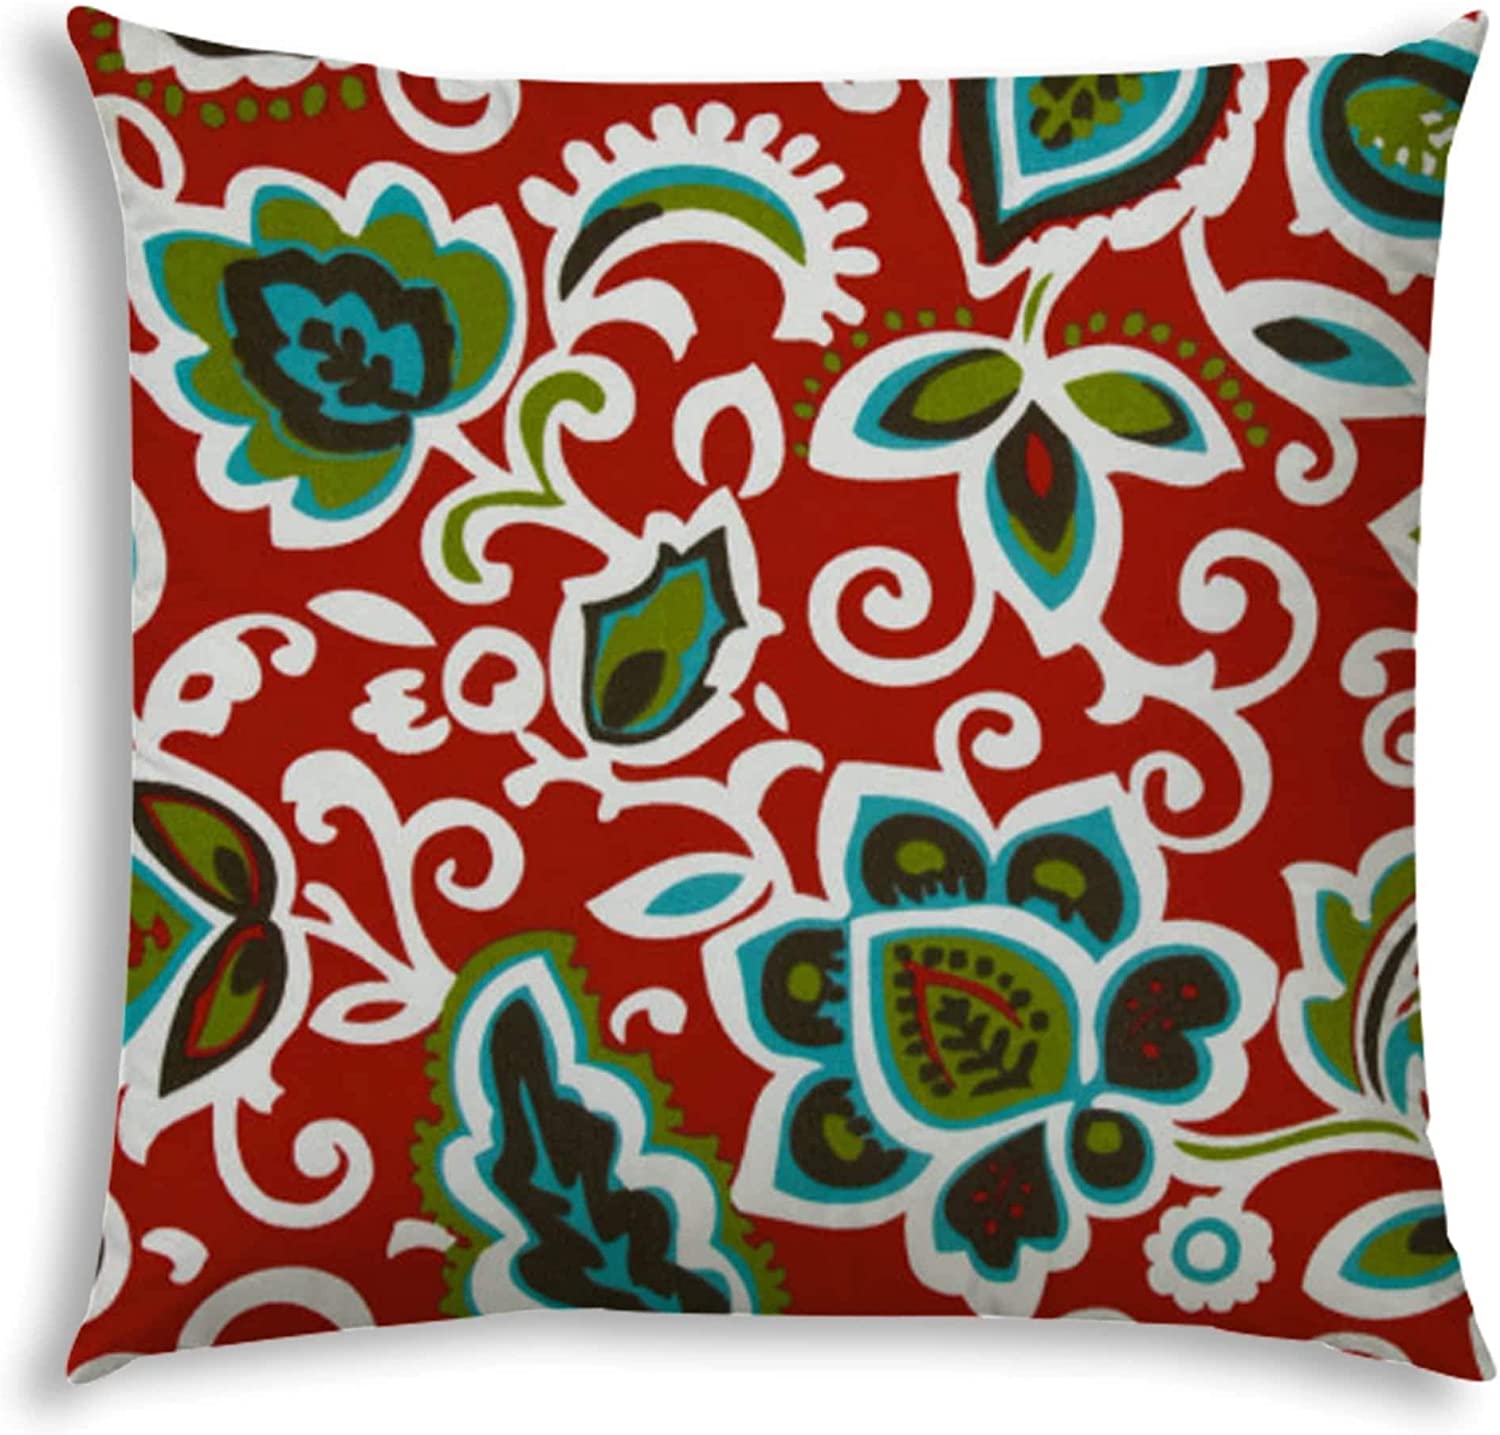 Dancing Flowers Indoor/Outdoor Pillow Sewn Closure Color Floral Modern Contemporary Polyester Water Resistant